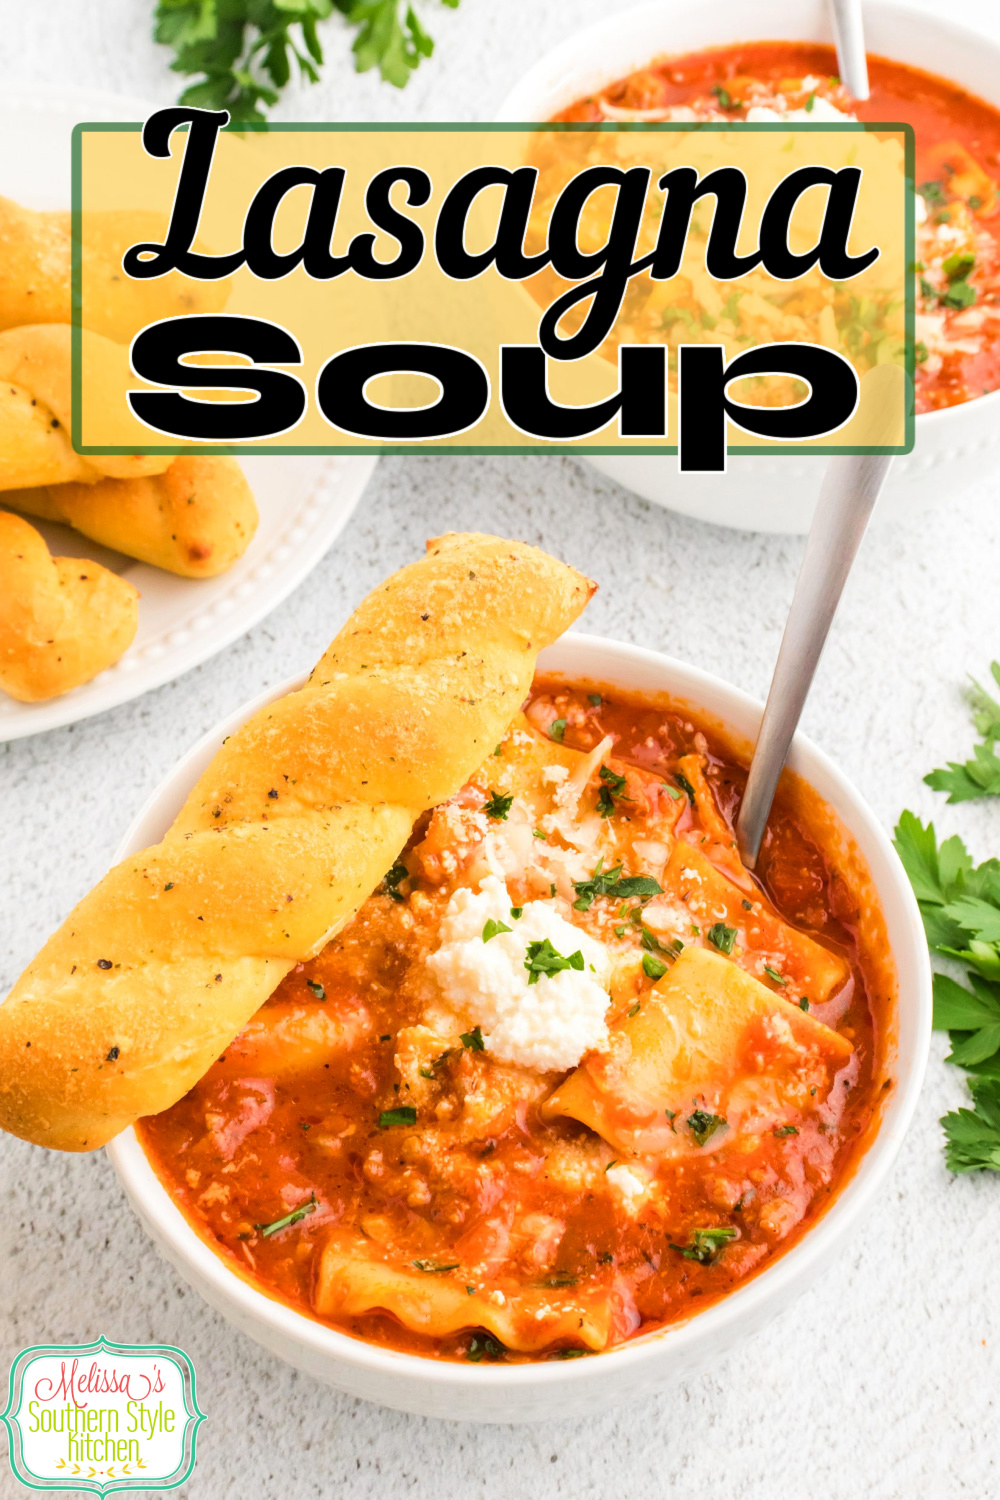 Serve this rich and hearty Lasagna Soup for an easy dinner any night of the week #lasagna #lasagnasoup #soup #souprecipes #Italiansoup #easylasagnarecipes #pasta #Italiansausage #easylasagnarecipe